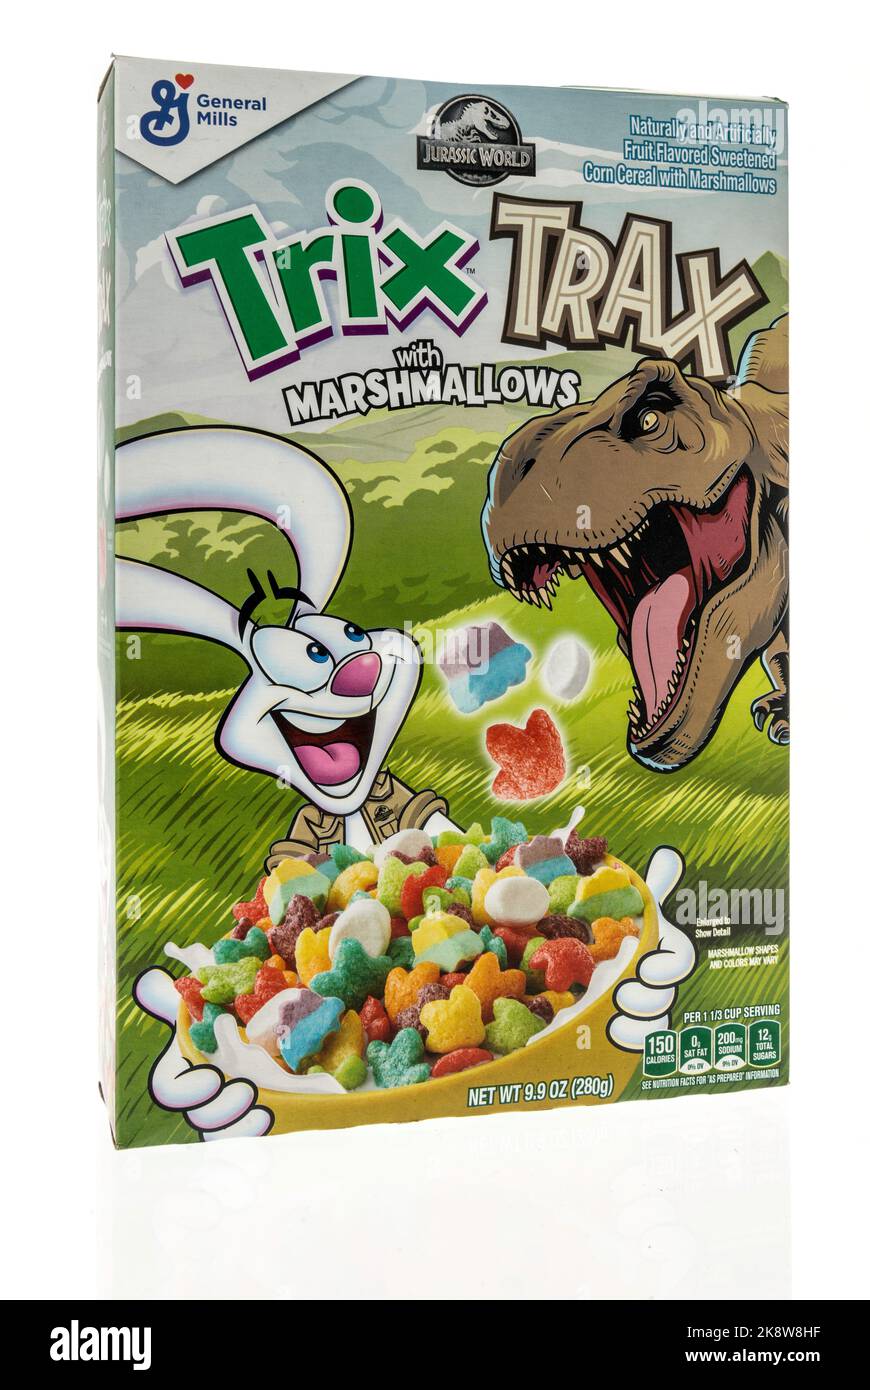 Winneconne, WI - 24 October 2022: A package of Trix Trax Jurassic world cereal on an isolated background. Stock Photo